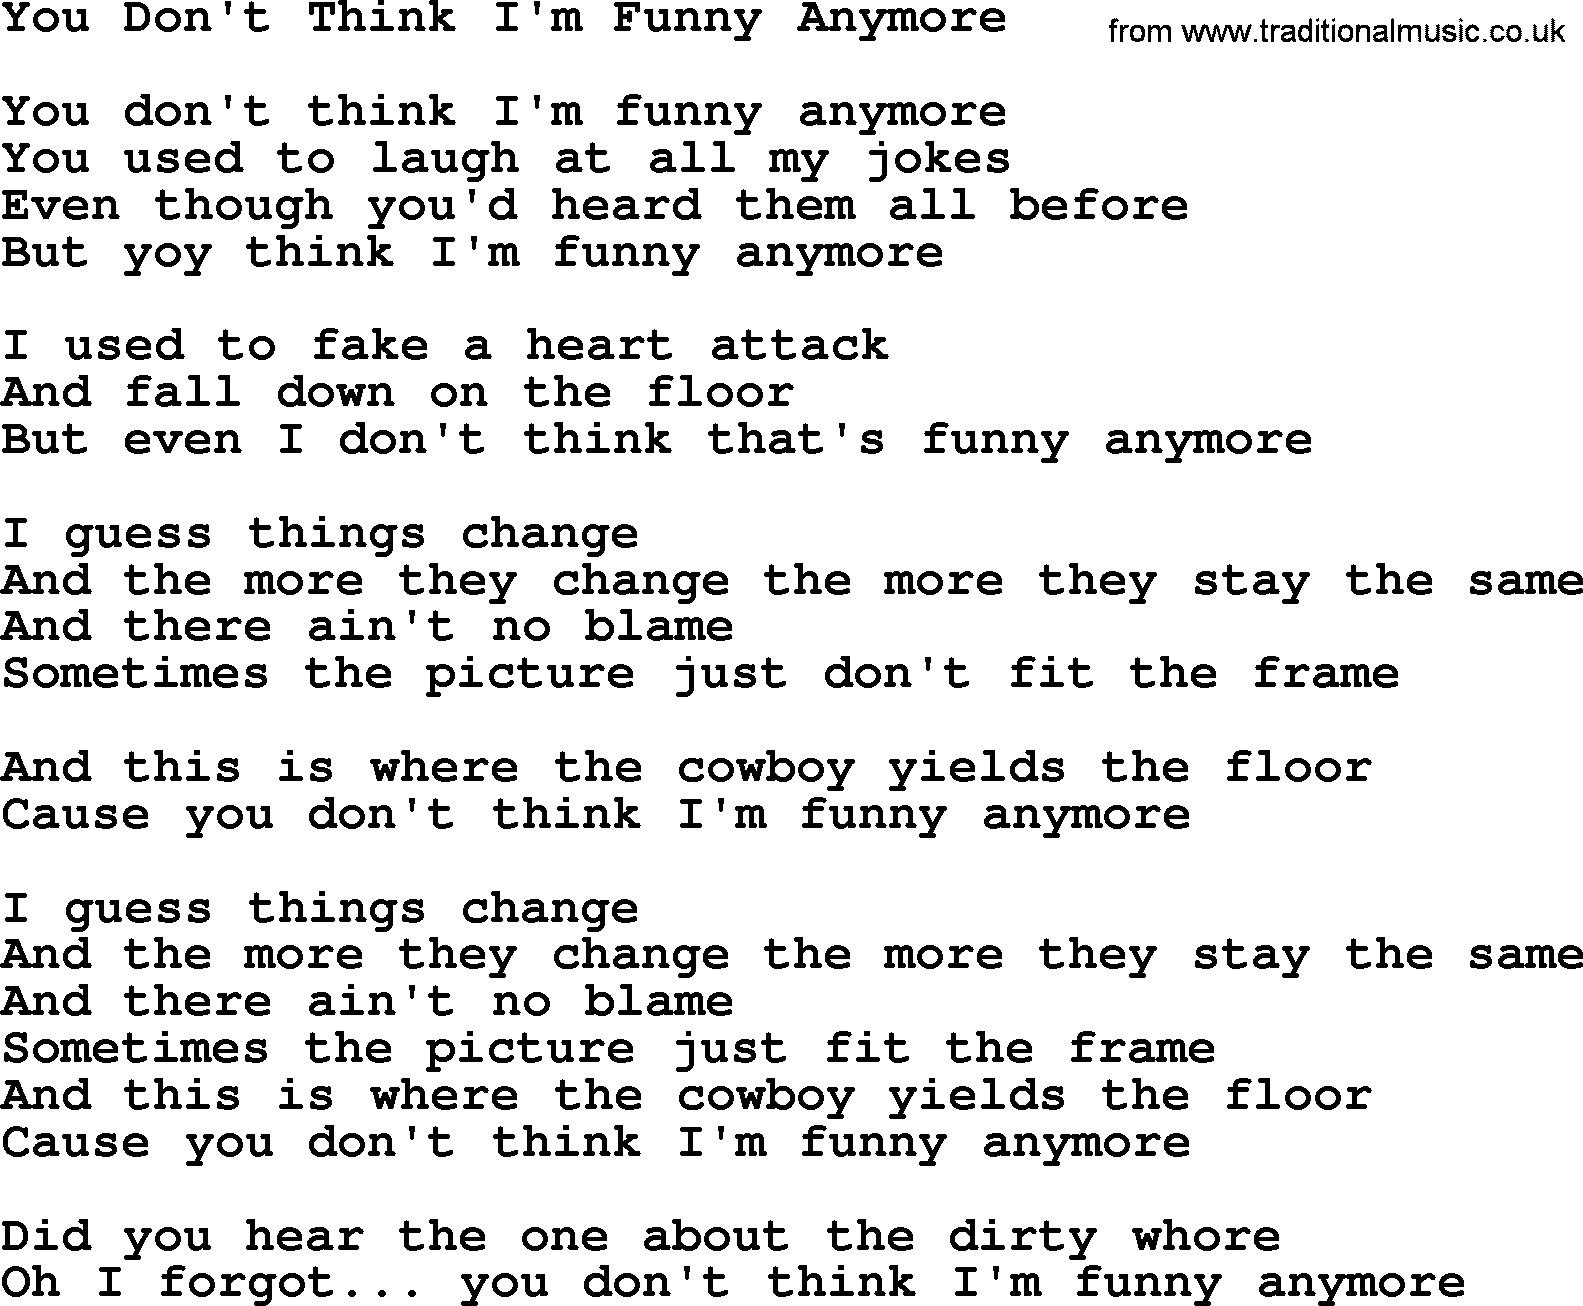 Willie Nelson song: You Don't Think I'm Funny Anymore lyrics